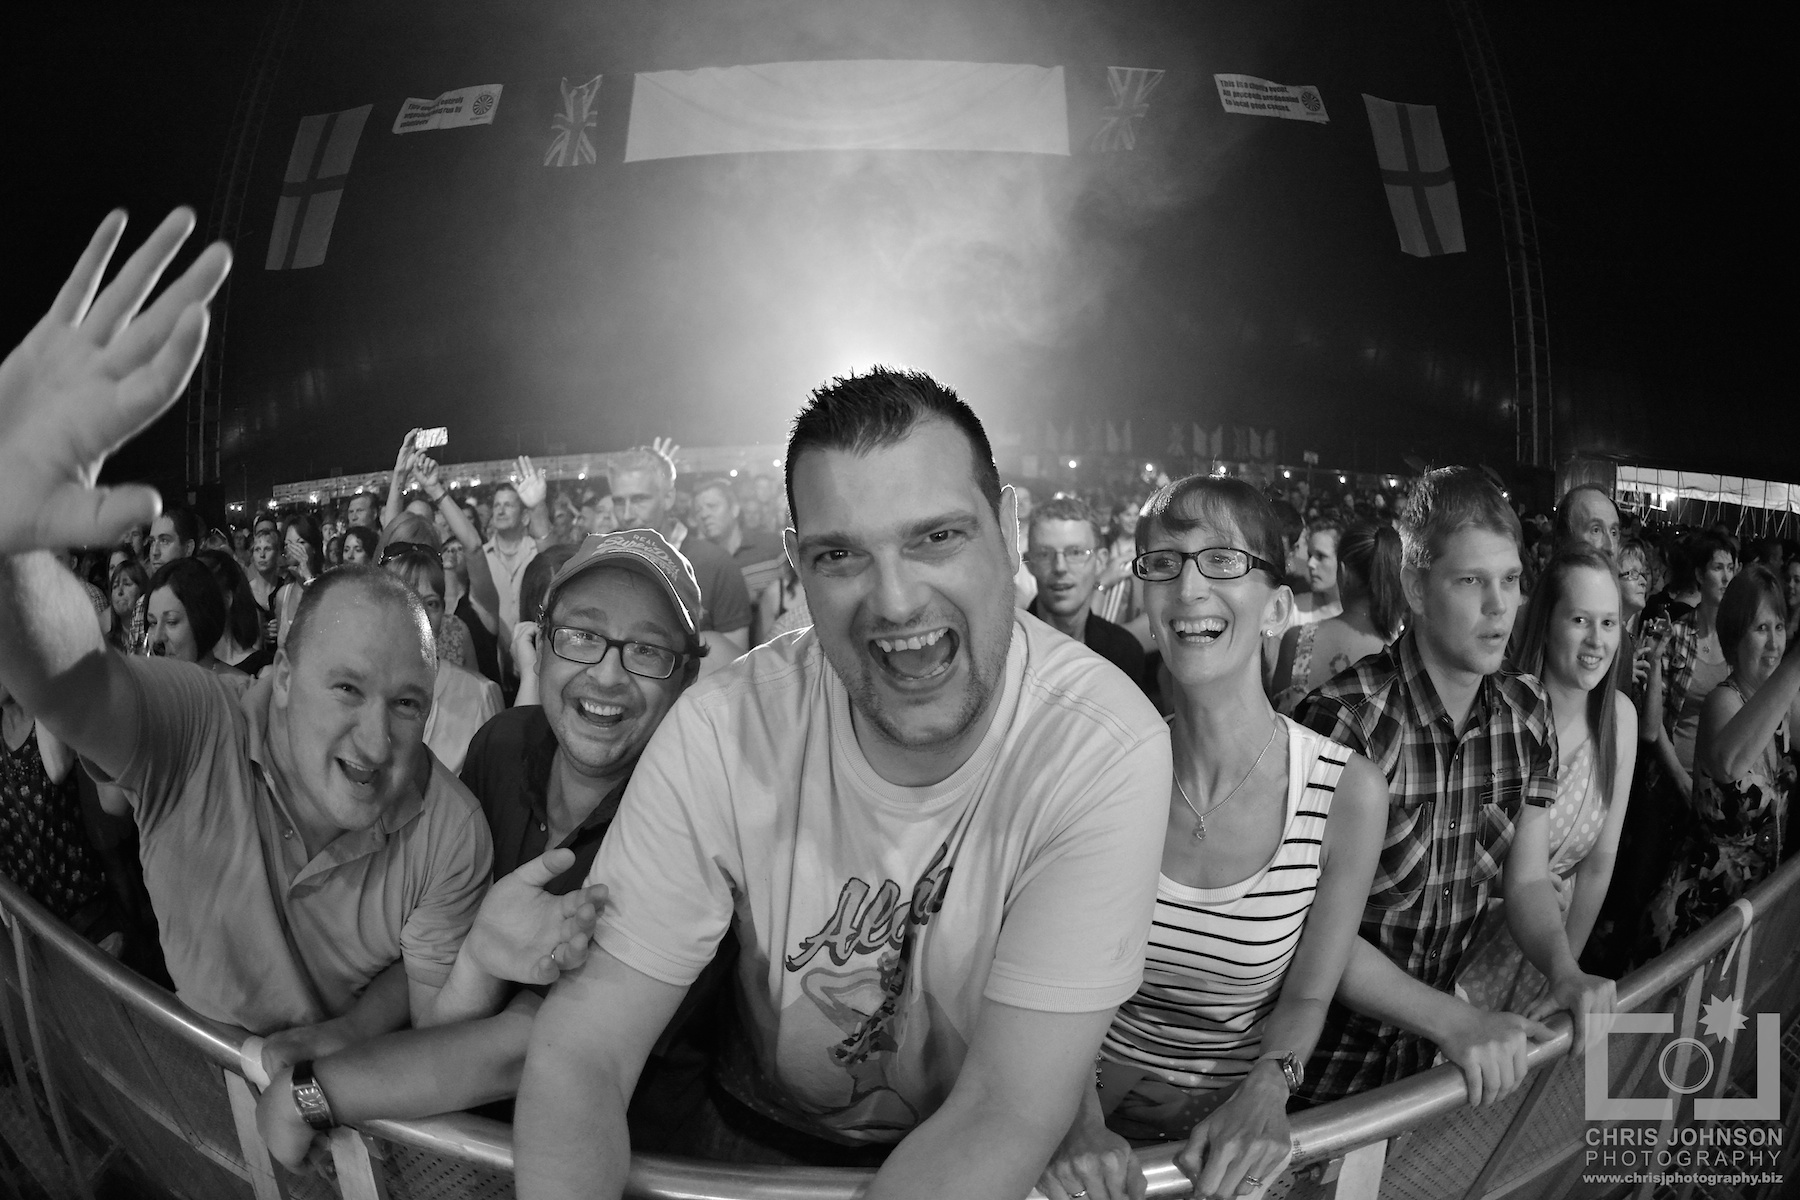 Black and white shot of the HBMF crowd from the stage perspective